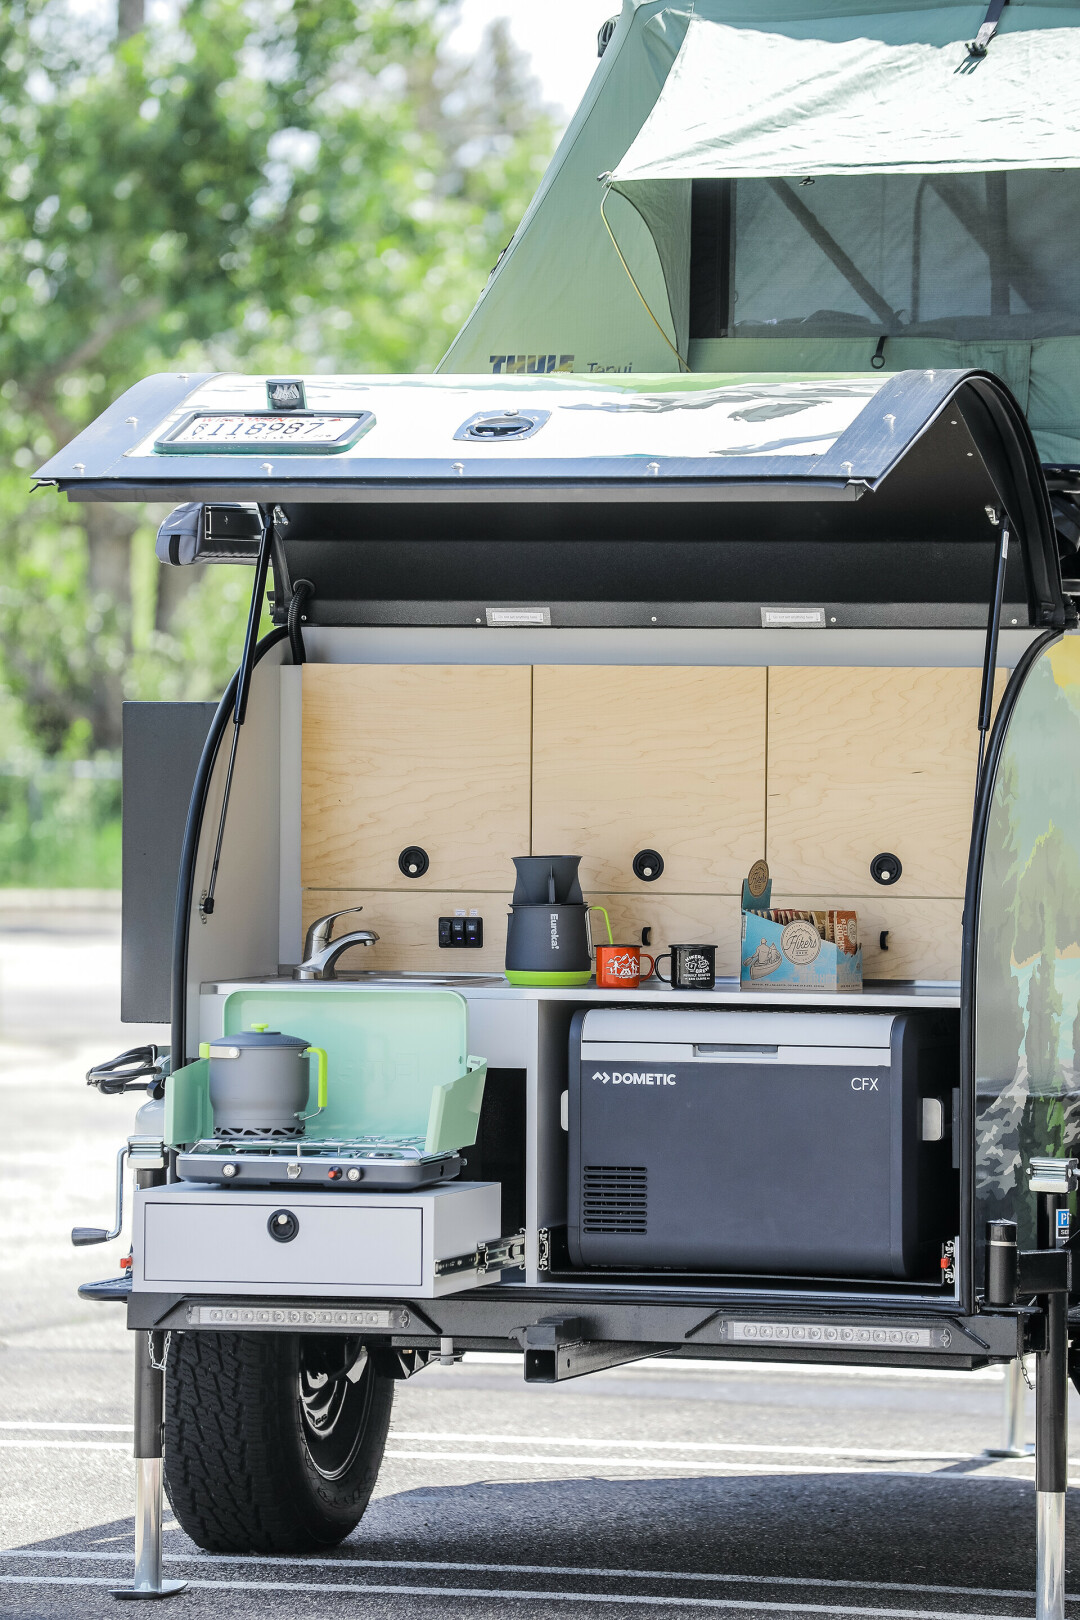 ALL SET FOR THE SUMMER. This cozy camper contains a sink, two-burner stove, air conditioning and heating, a fridge/freezer, USB cable chargers for your phone, and a propane box for hot water, offering you the chance to take hot showers on the go. Talk about 